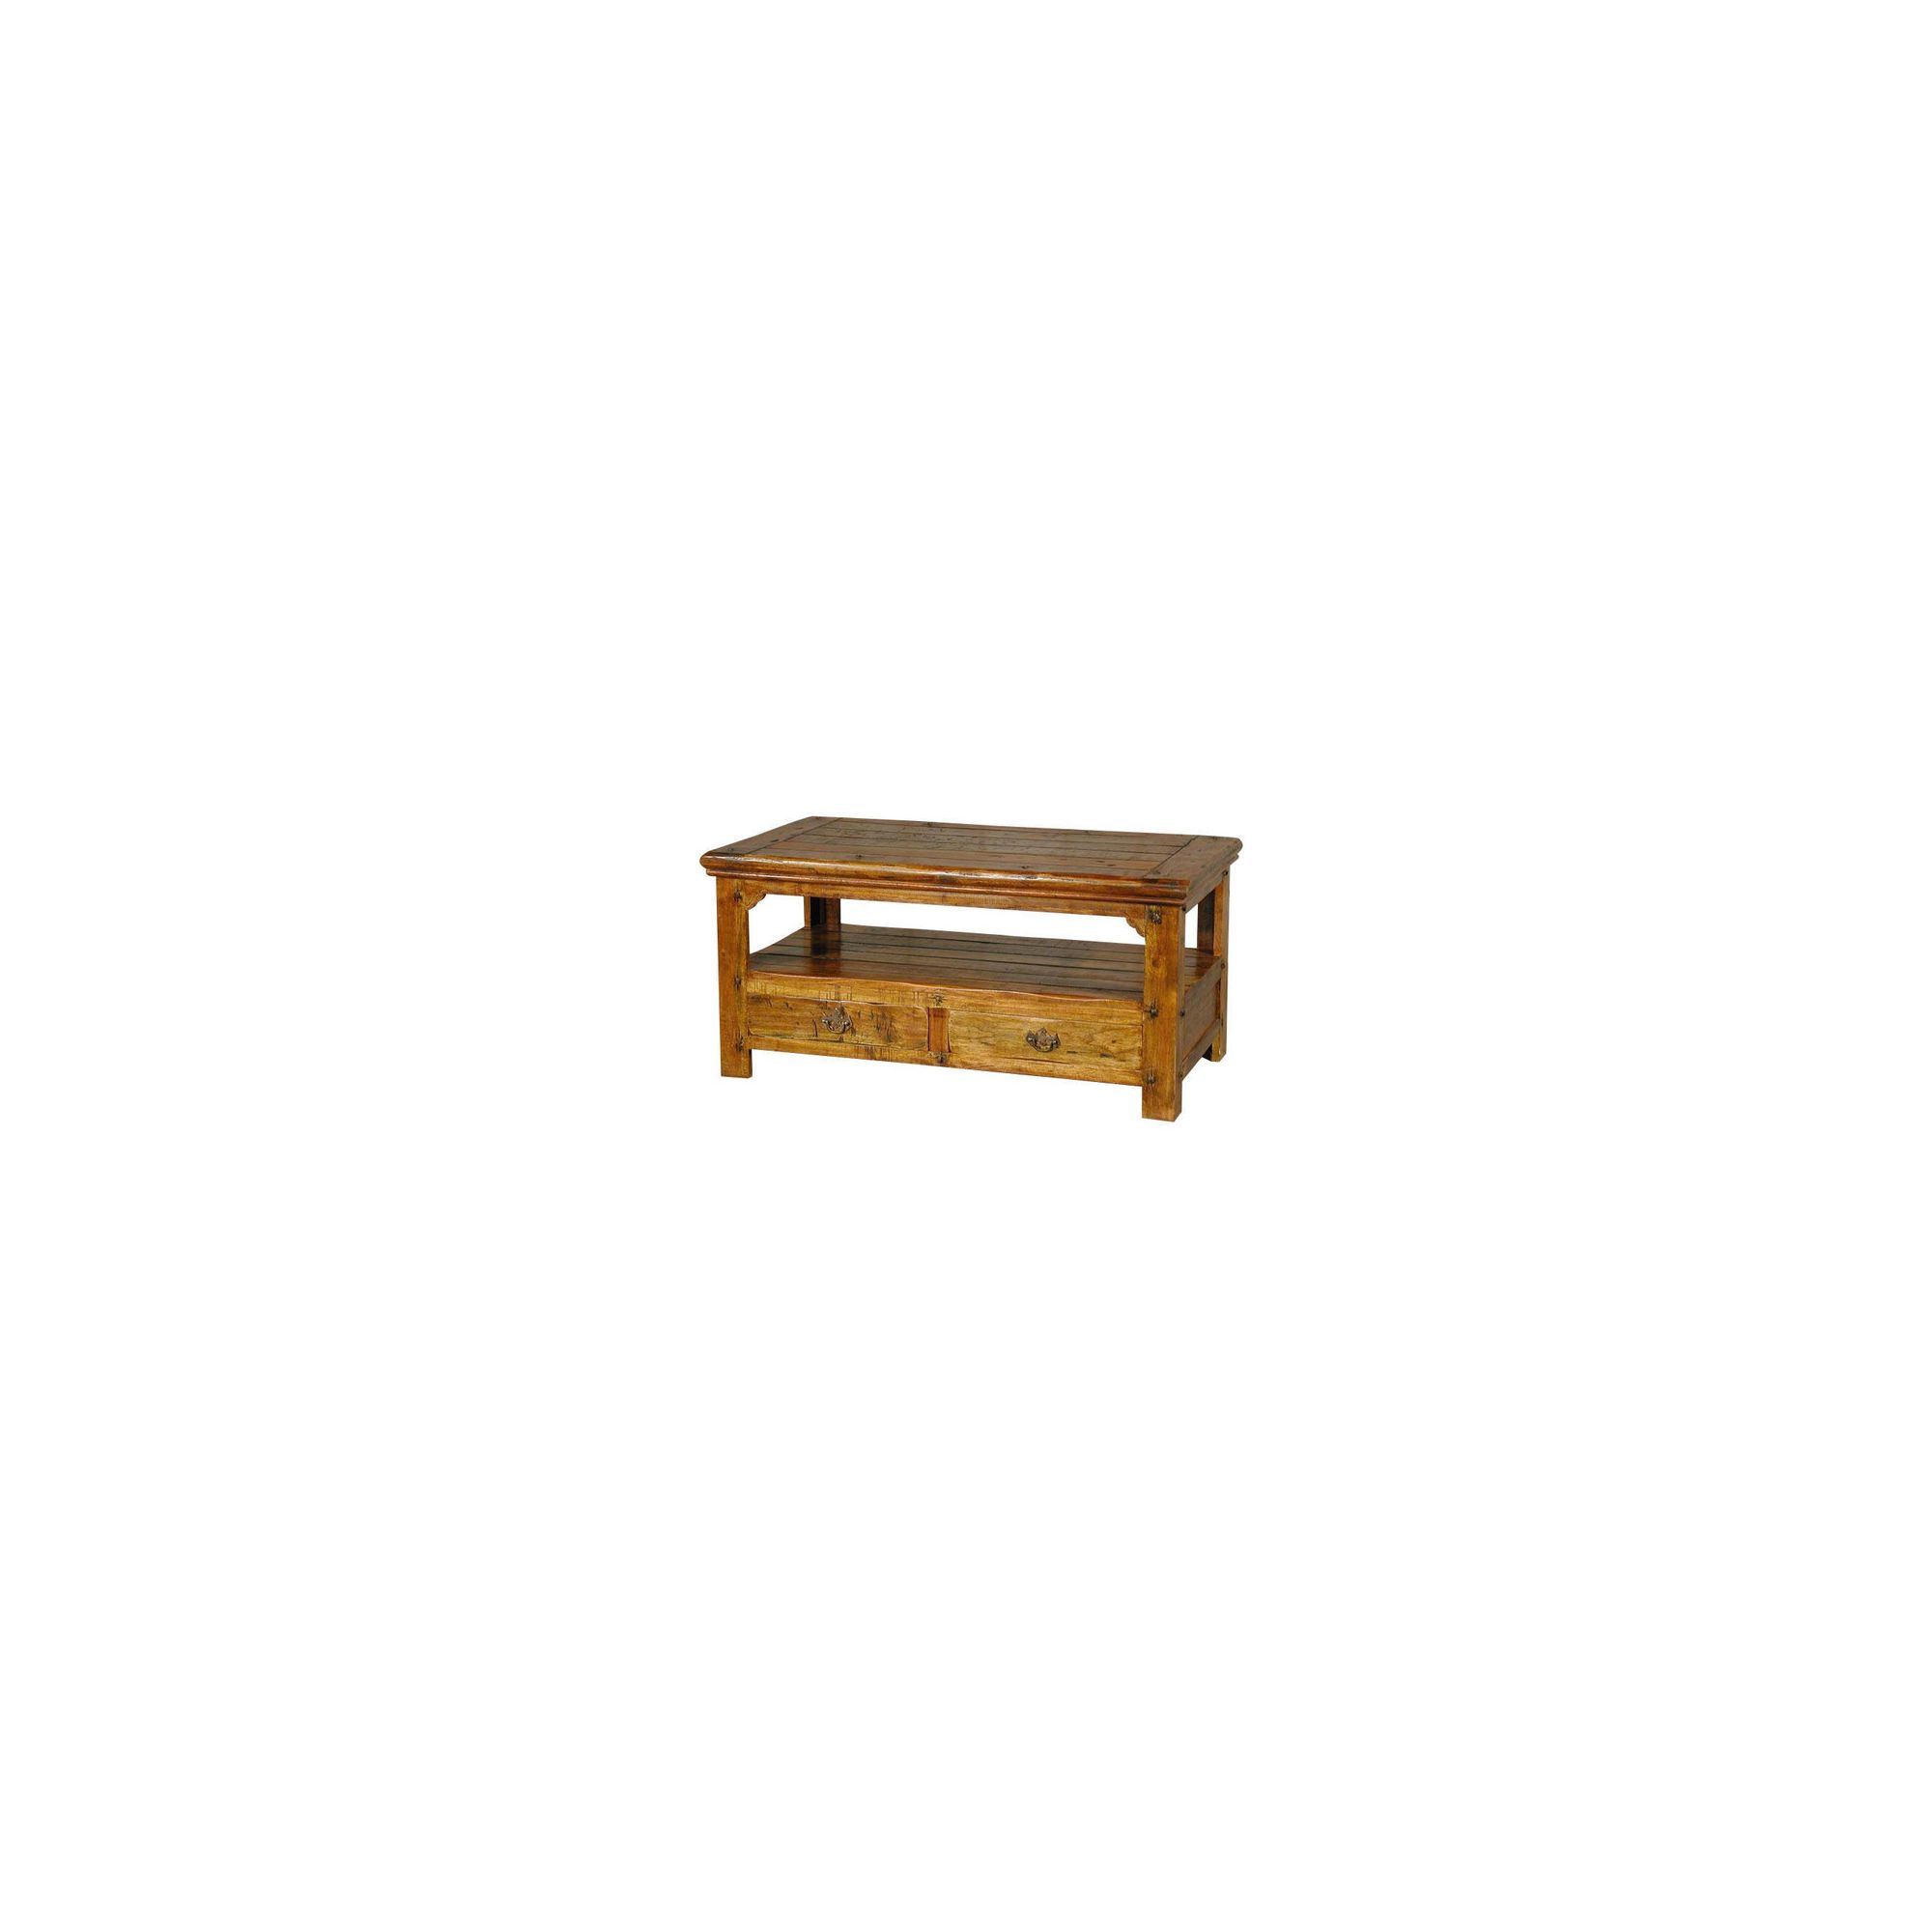 Alterton Furniture Granary 4 Drawer Coffee Table at Tesco Direct